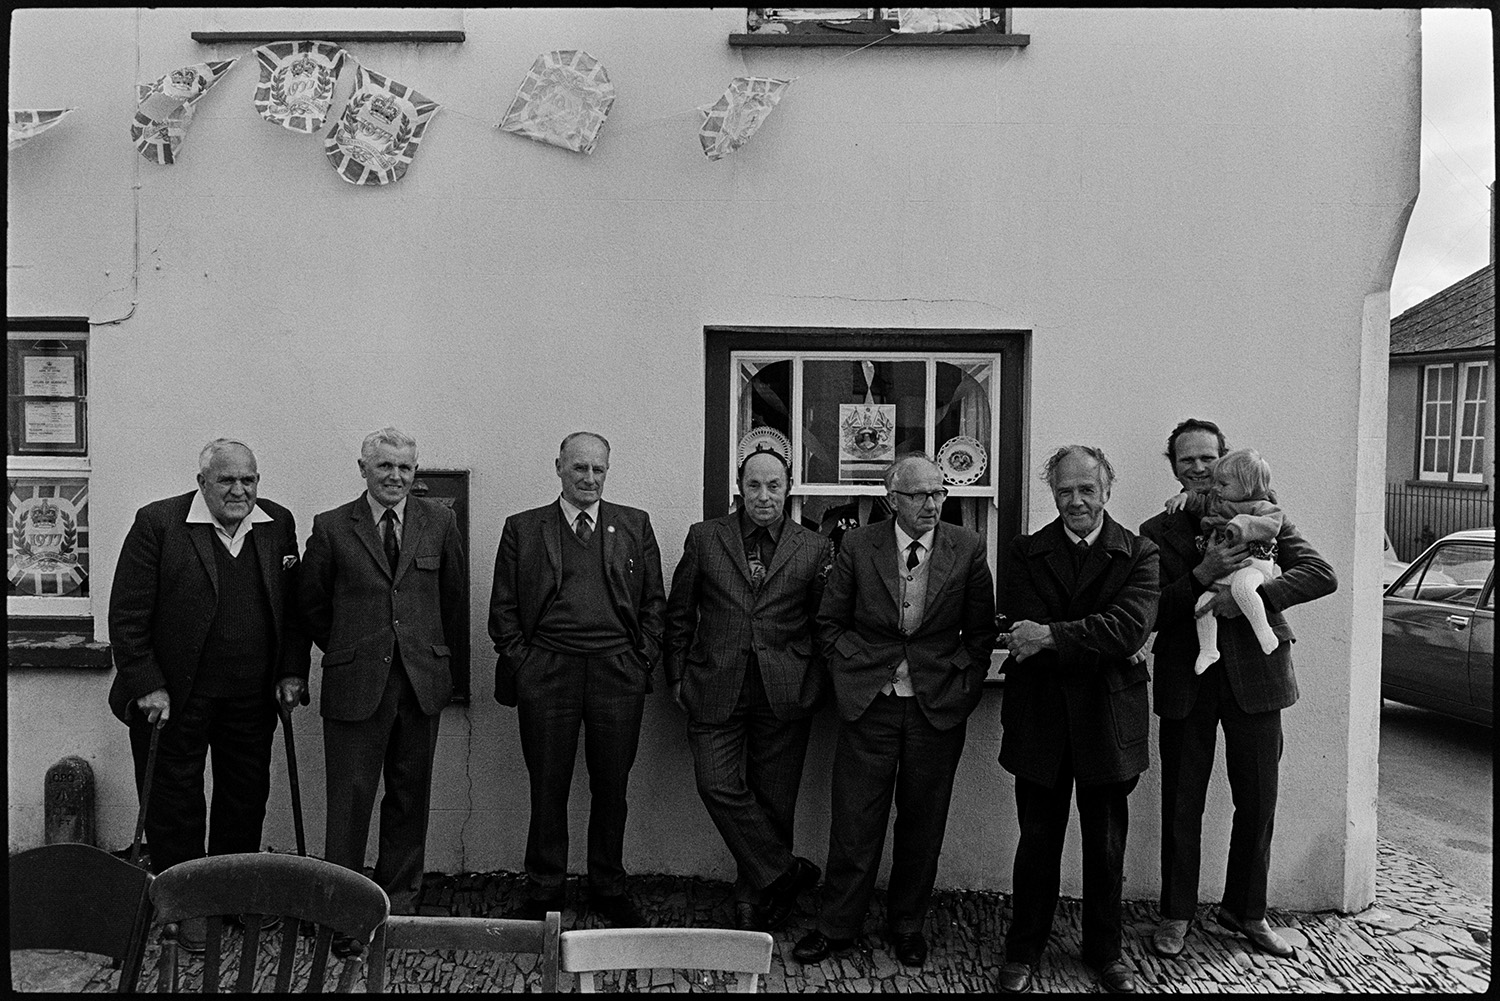 Men waiting for start of Jubilee tea in village street. 
[A row of men stood in a street in High Bickington waiting for the start of a tea or street party to celebrate the Silver Jubilee of Queen Elizabeth II. One of the men is holding a child and the building behind is decorated with bunting. John Tucker is second from left and Bill Laramy is third from the left. Mr Marden is third from the right.]